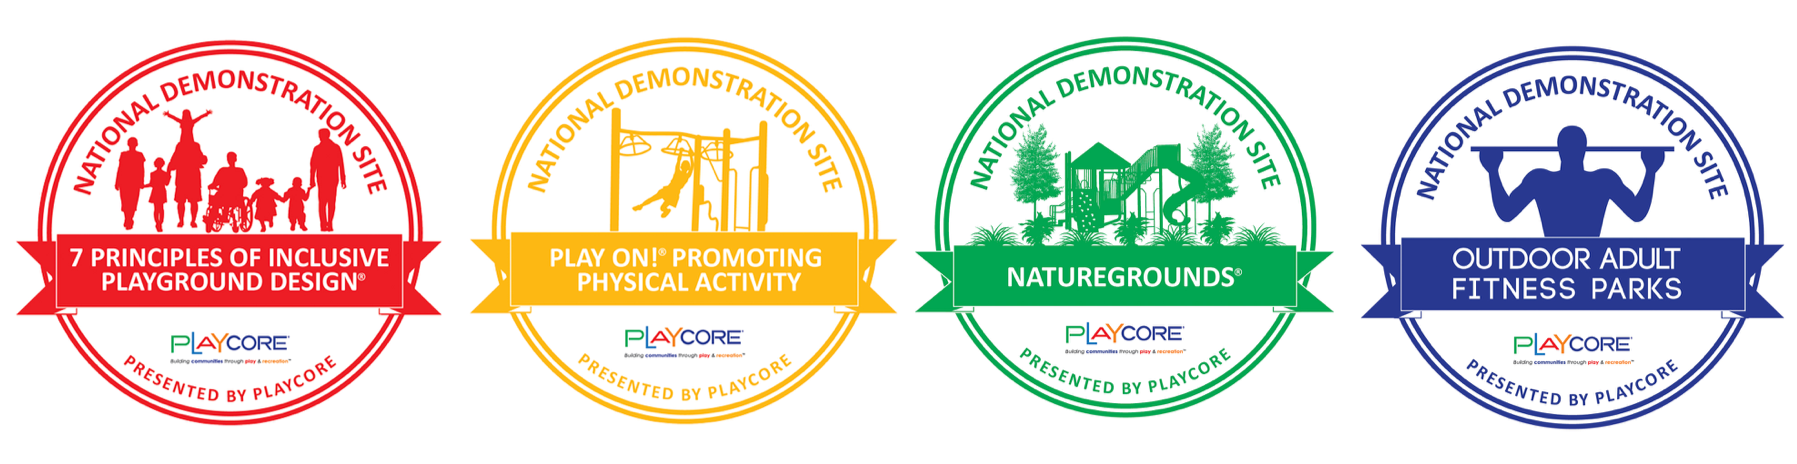 Red, yellow, green, and blue National Demonstration site logos for 7 principles, Play on!, Naturegrounds, Outdoor Adult Fitness Parks